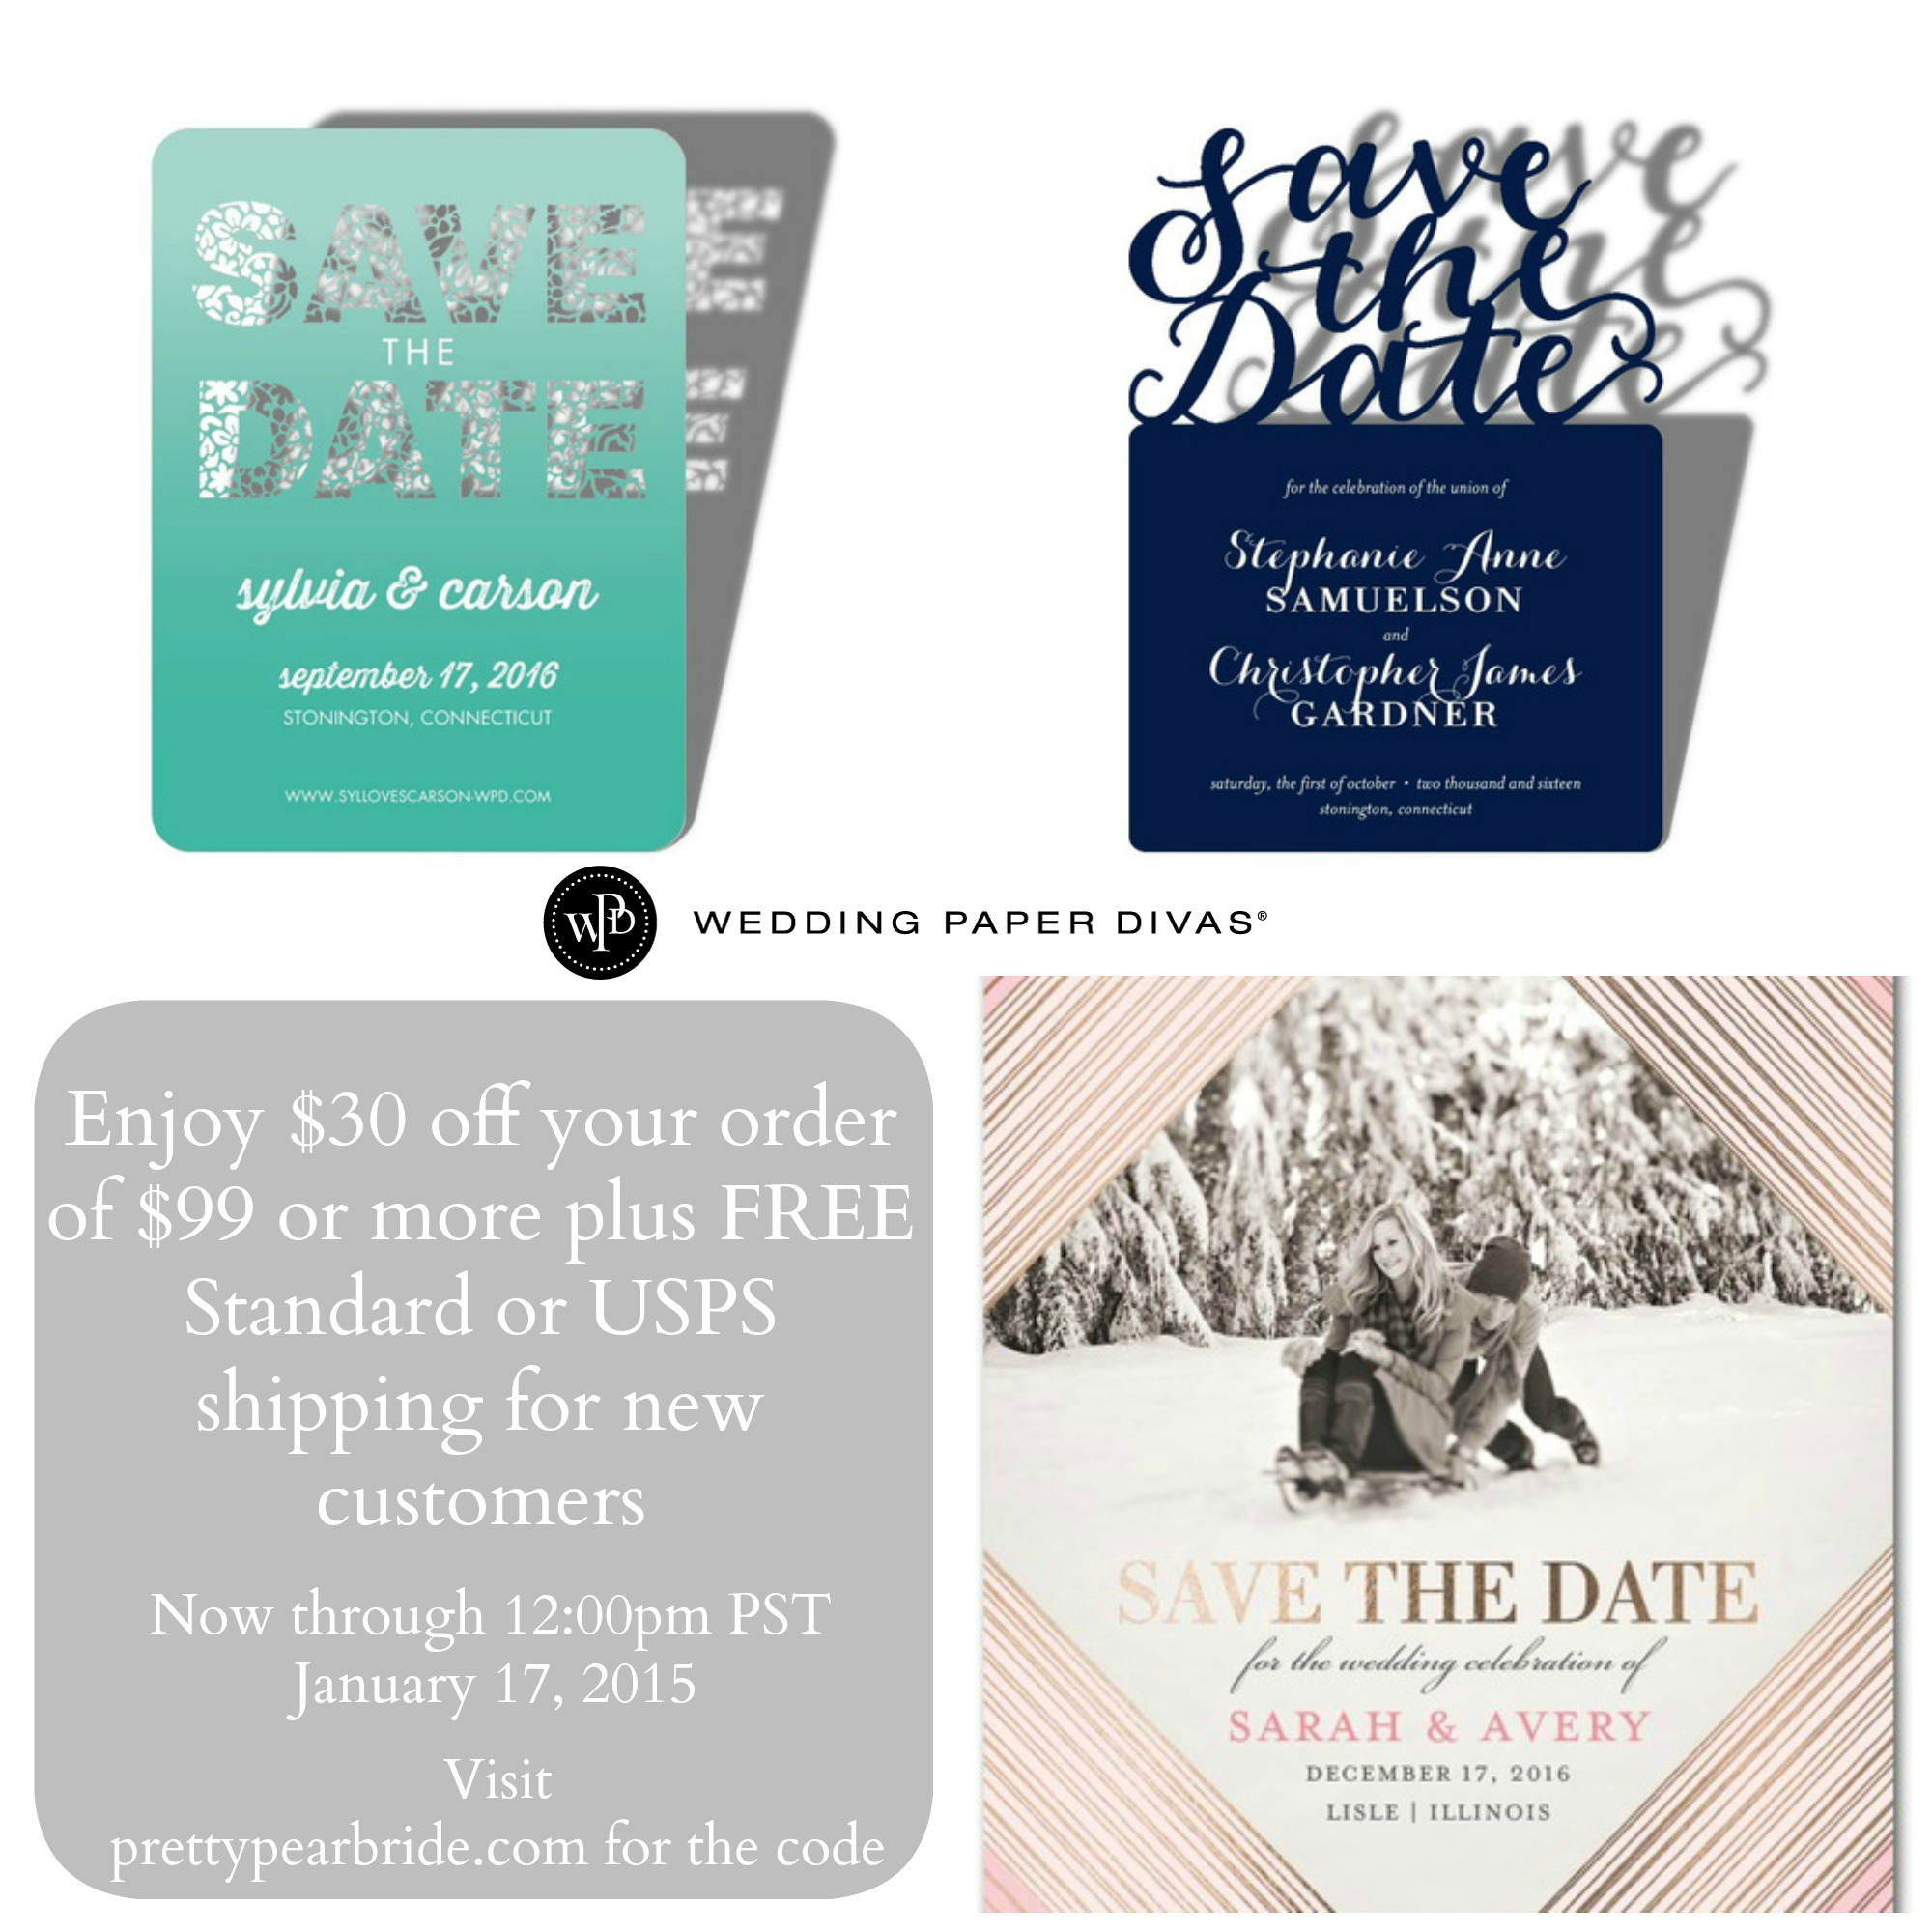 {Friday Find} Enjoy $30 off your order of $99 or more from Wedding Paper Divas